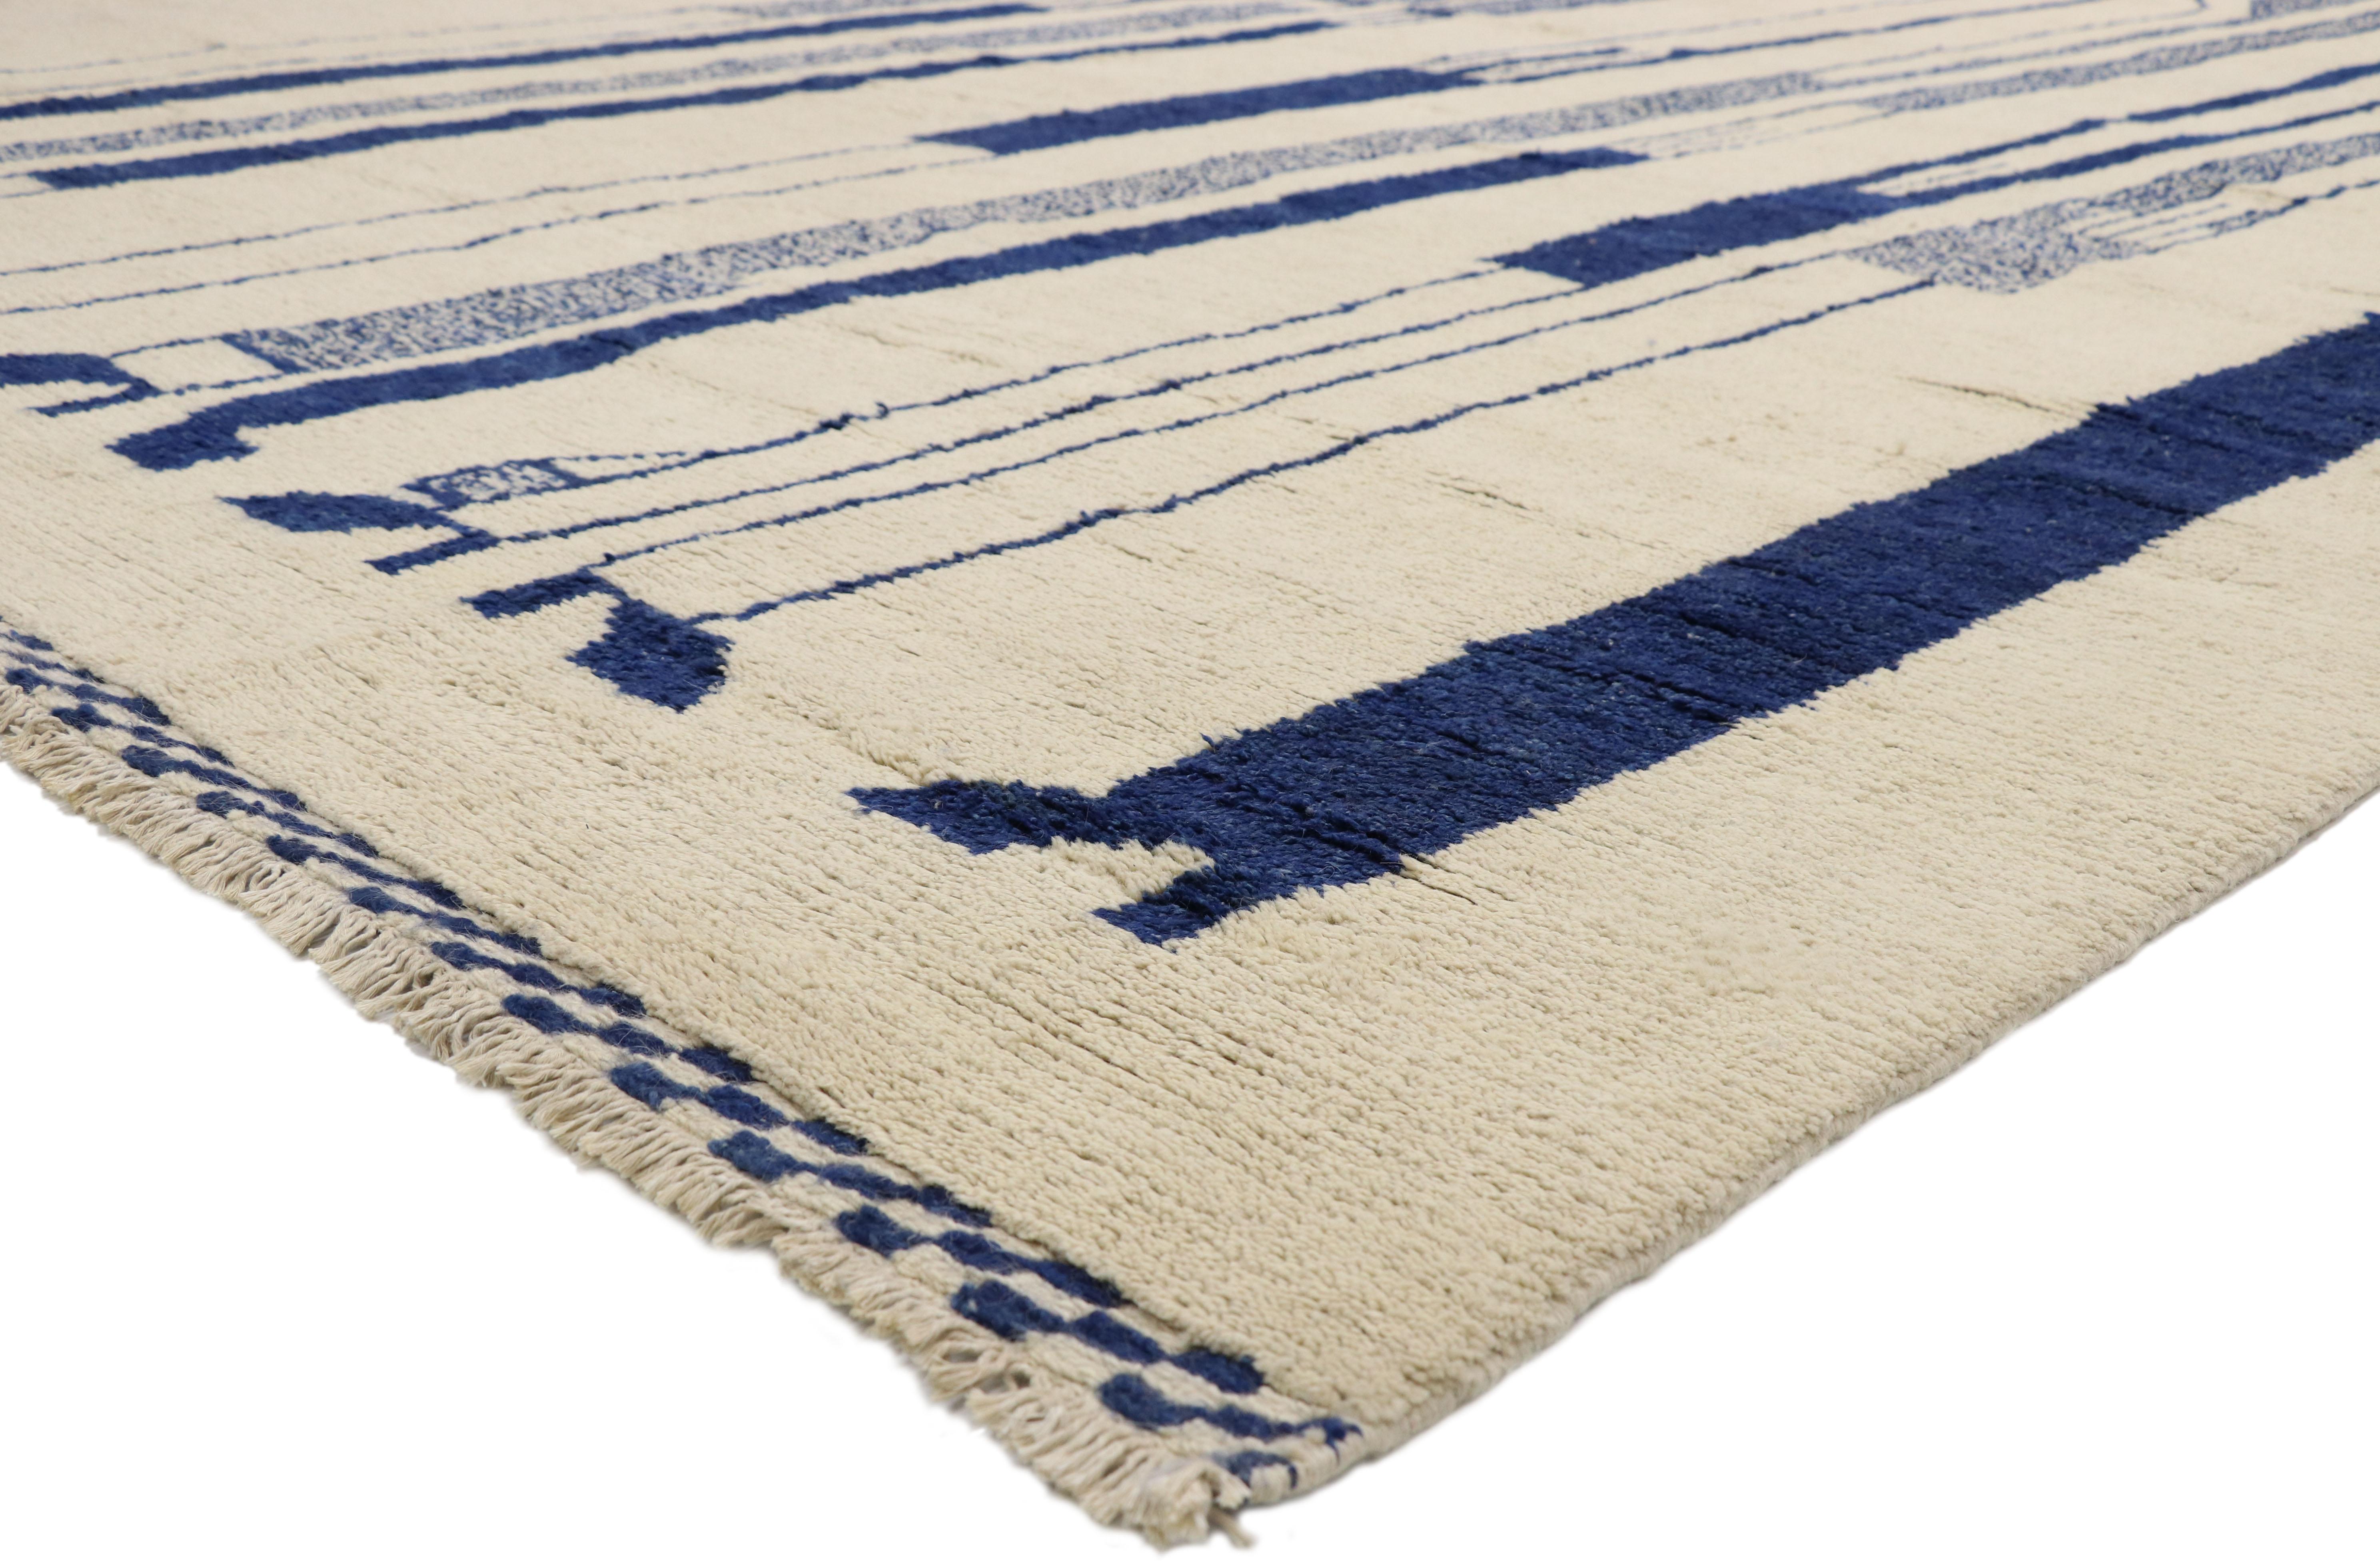 80532, new contemporary Moroccan rug Inspired by Alberto Giacometti Dogon Tribe. This hand knotted wool contemporary Moroccan style area rug features elongated silhouettes in a blue-scale palette against a solid creamy-beige backdrop. With cool Jazz